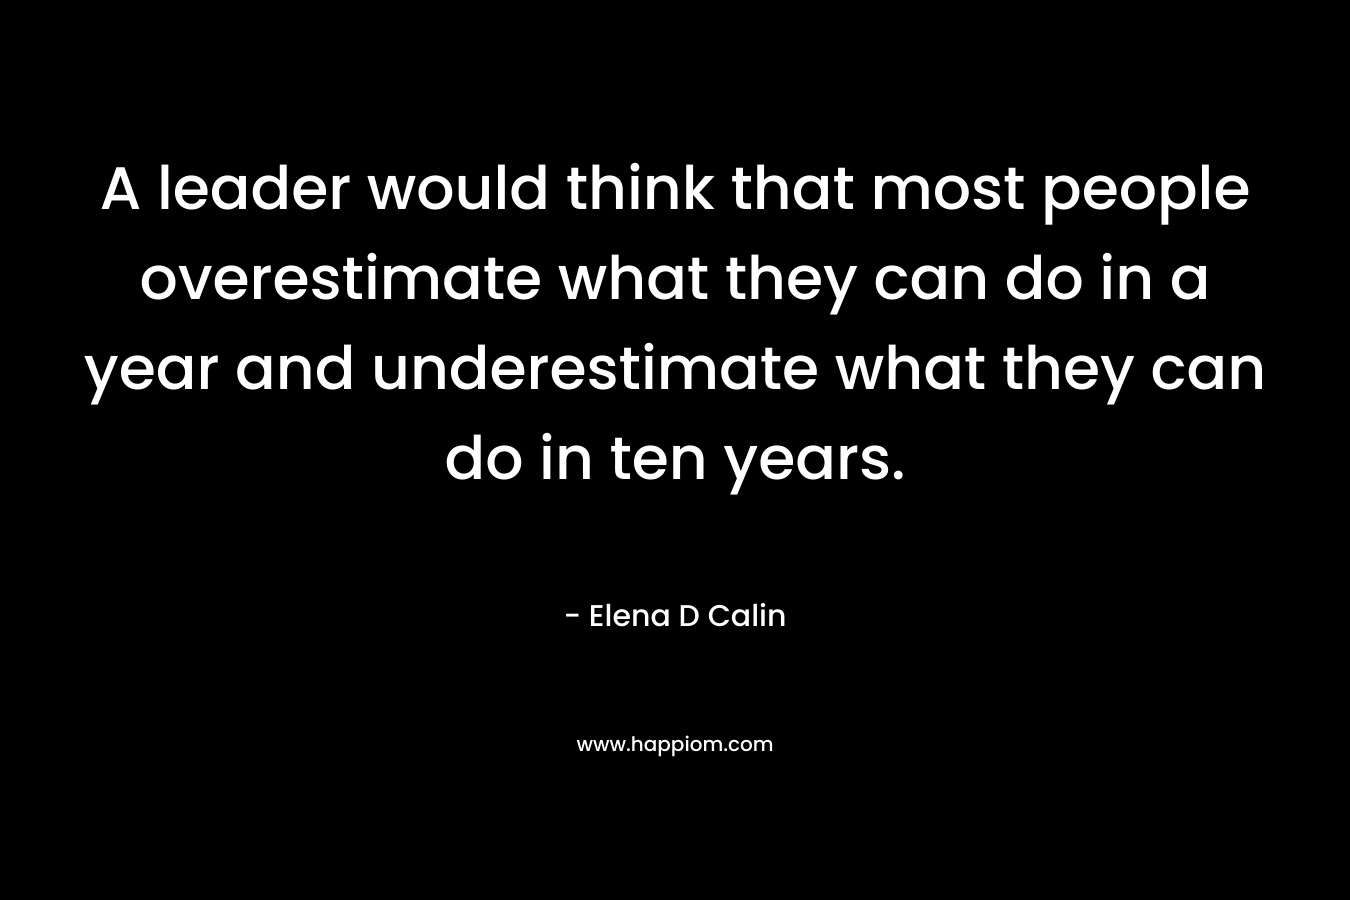 A leader would think that most people overestimate what they can do in a year and underestimate what they can do in ten years.